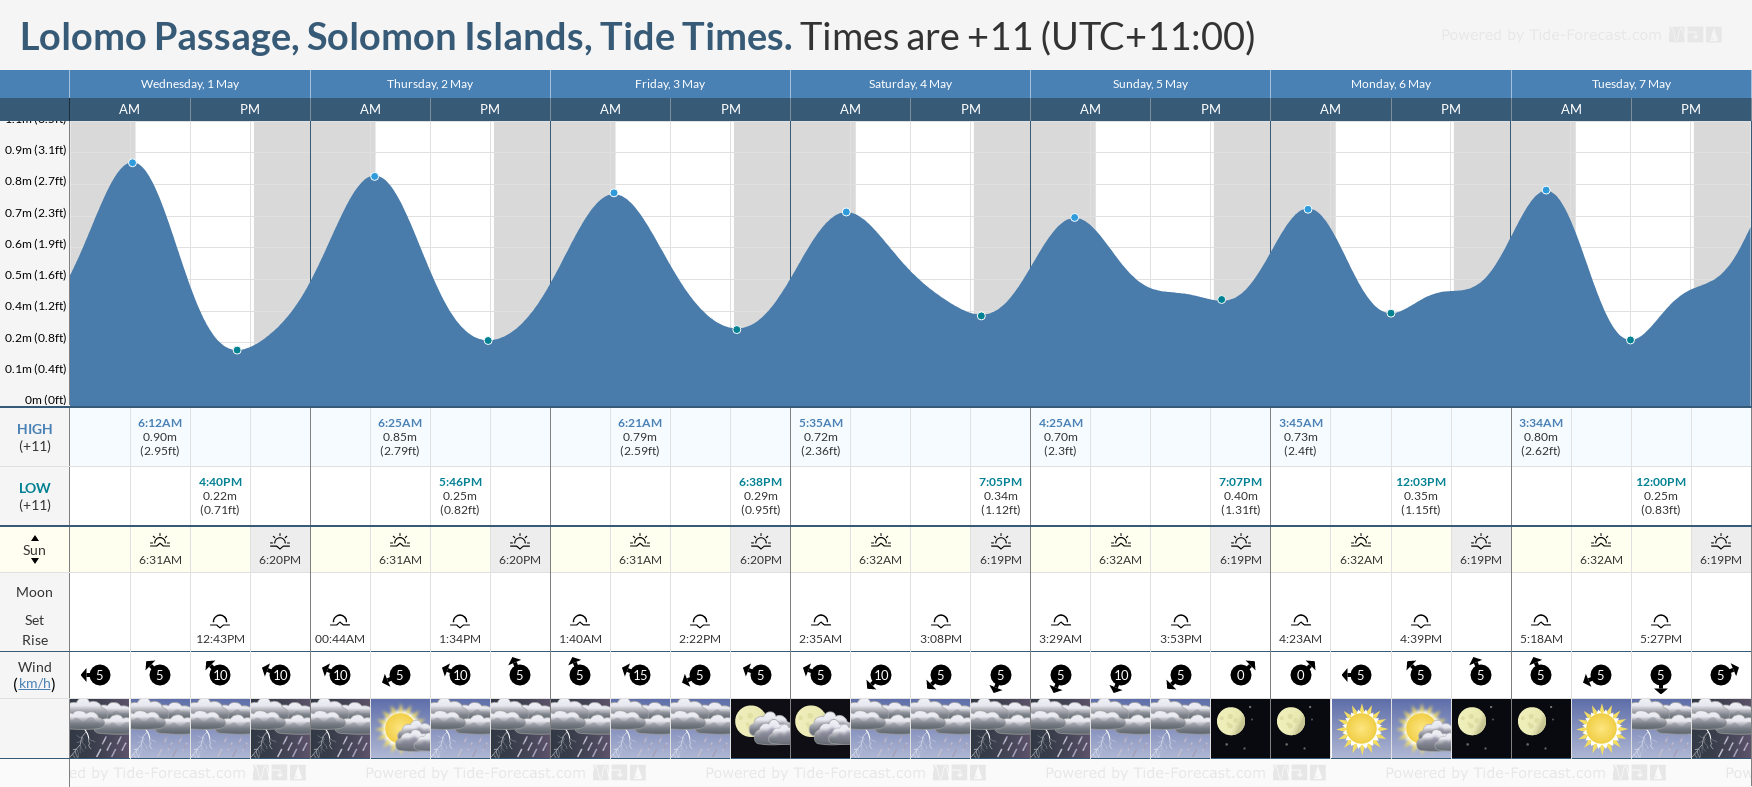 Lolomo Passage, Solomon Islands Tide Chart including high and low tide tide times for the next 7 days